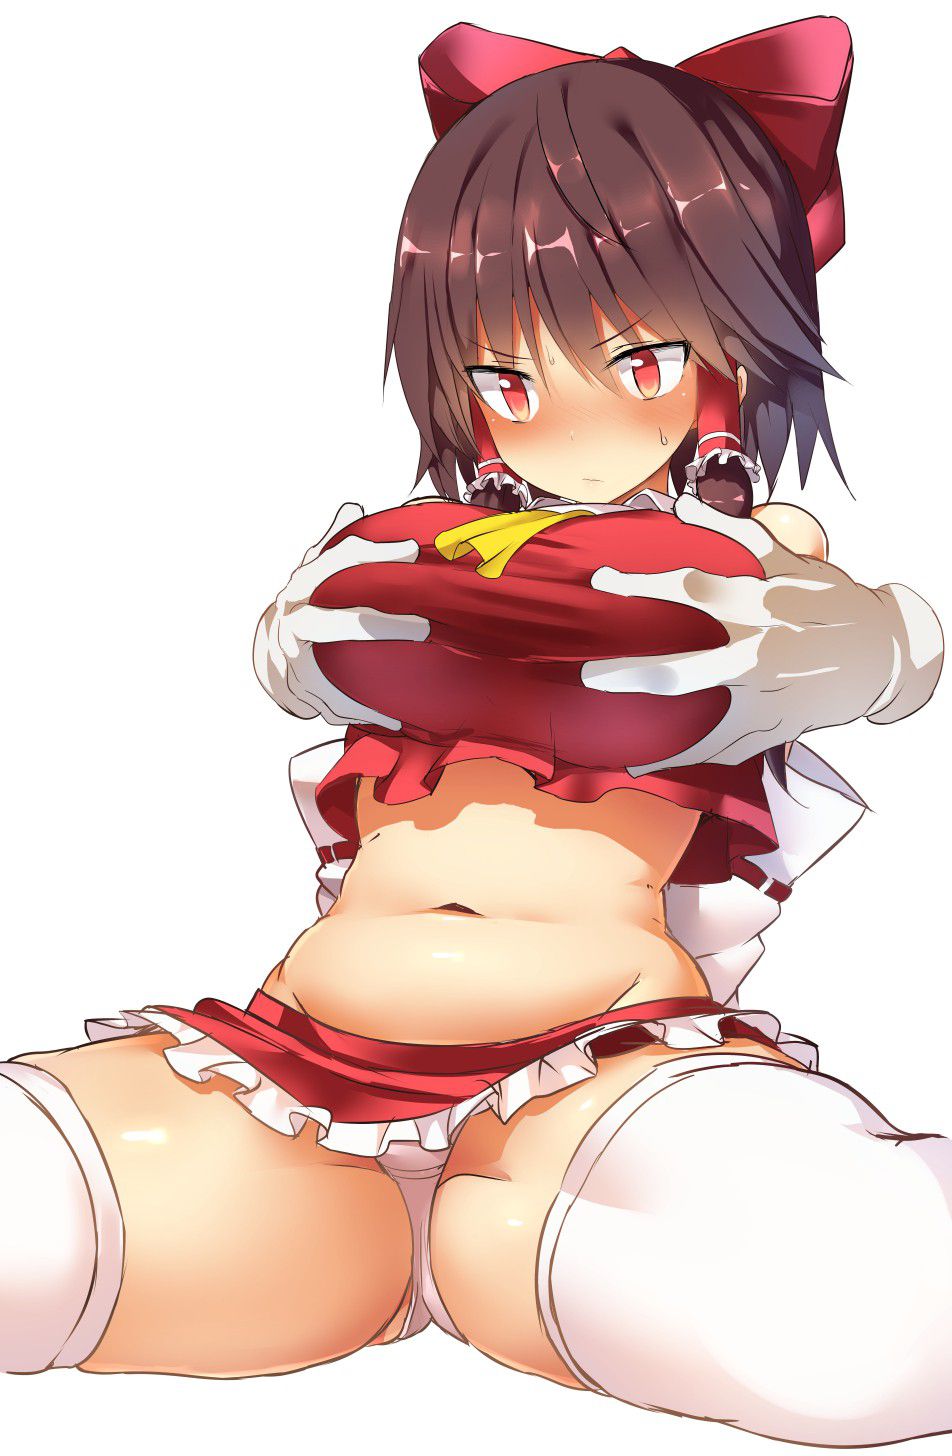 [Secondary] erotic image of a chubby girl who raised the position at once in the boy in the last 10 years or so 37